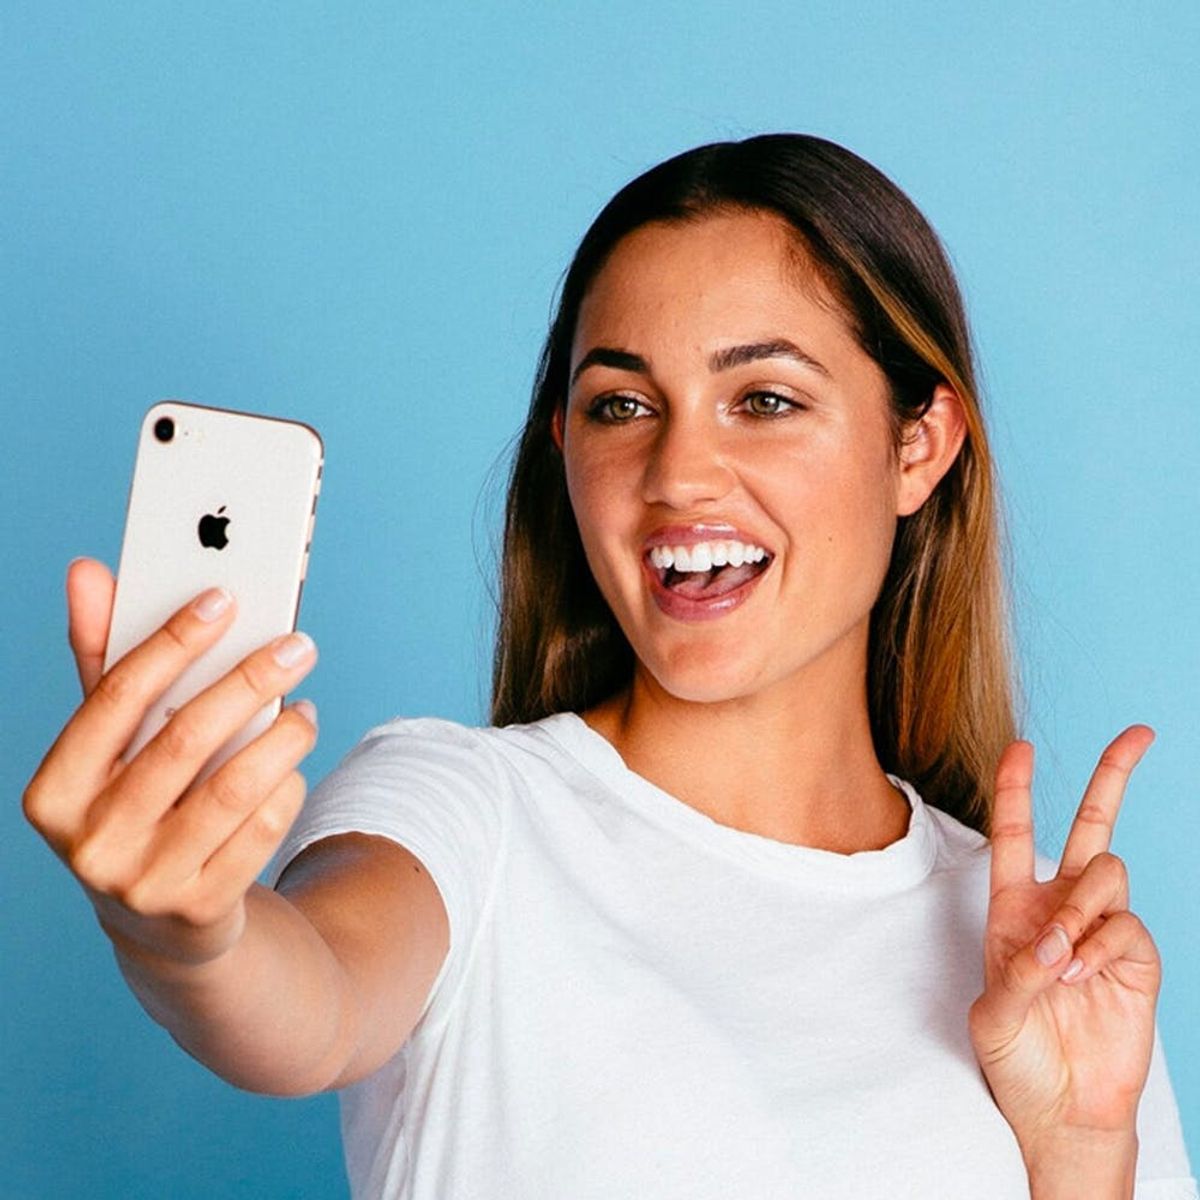 This Dermatologist-Backed App Treats Your Acne Woes in a Flash